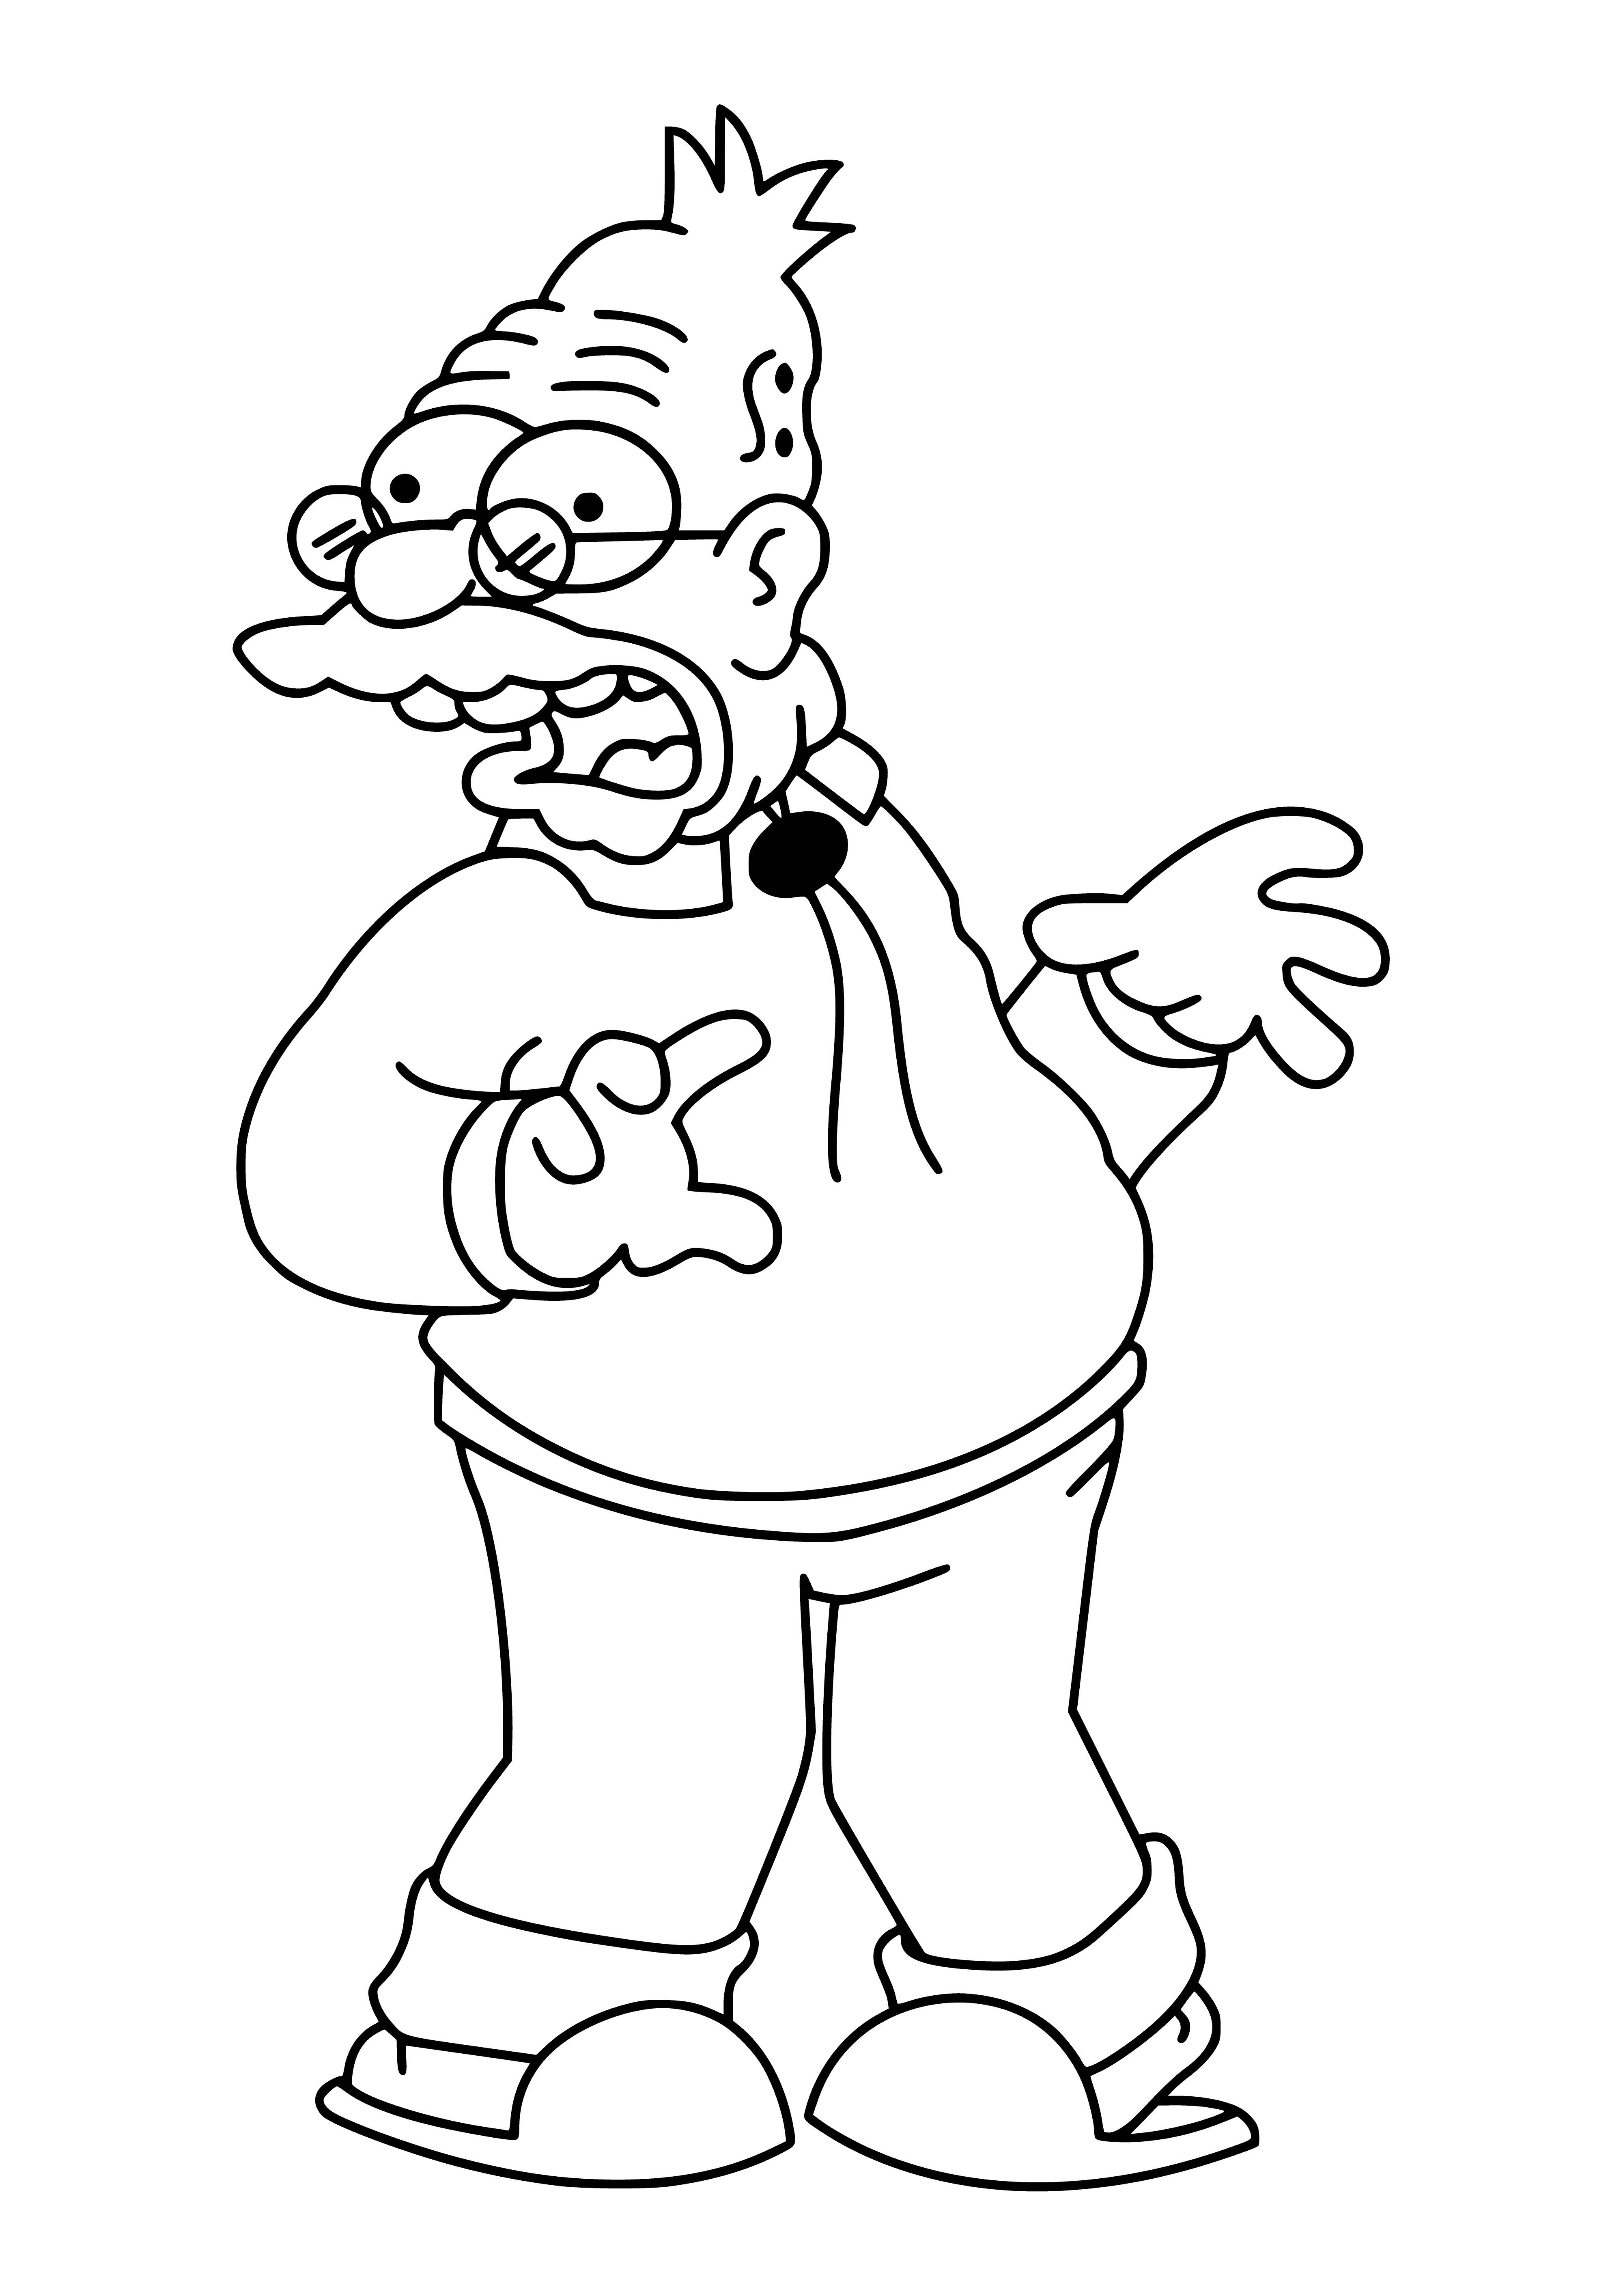 Homer's father - Abraham Simpson coloring page